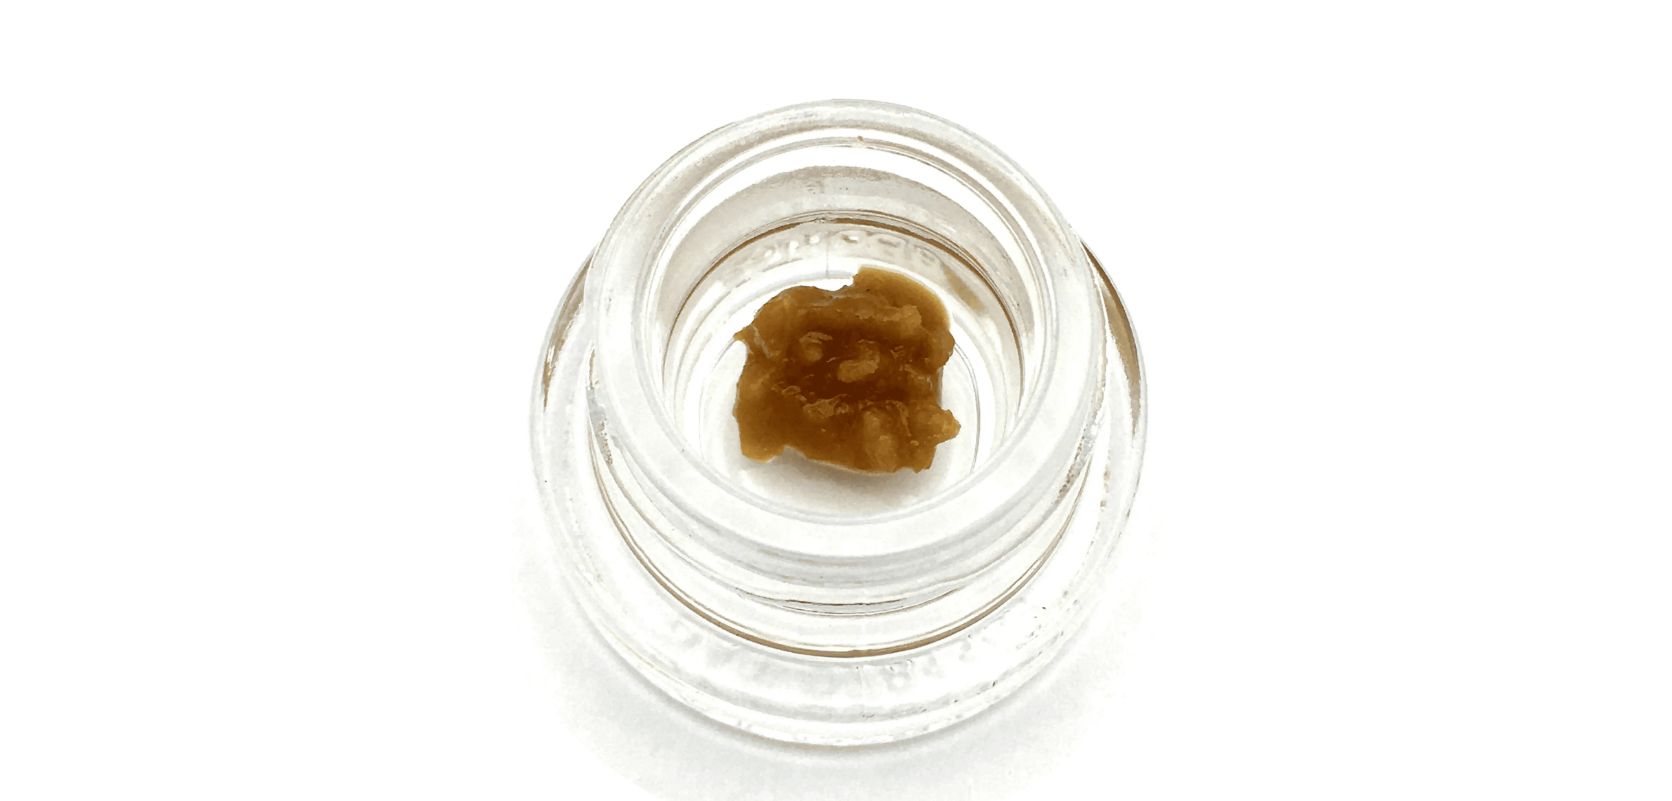 Live resin uses a special method with frozen cannabis, while rosin keeps it simple with heat and pressure—no fancy chemicals.